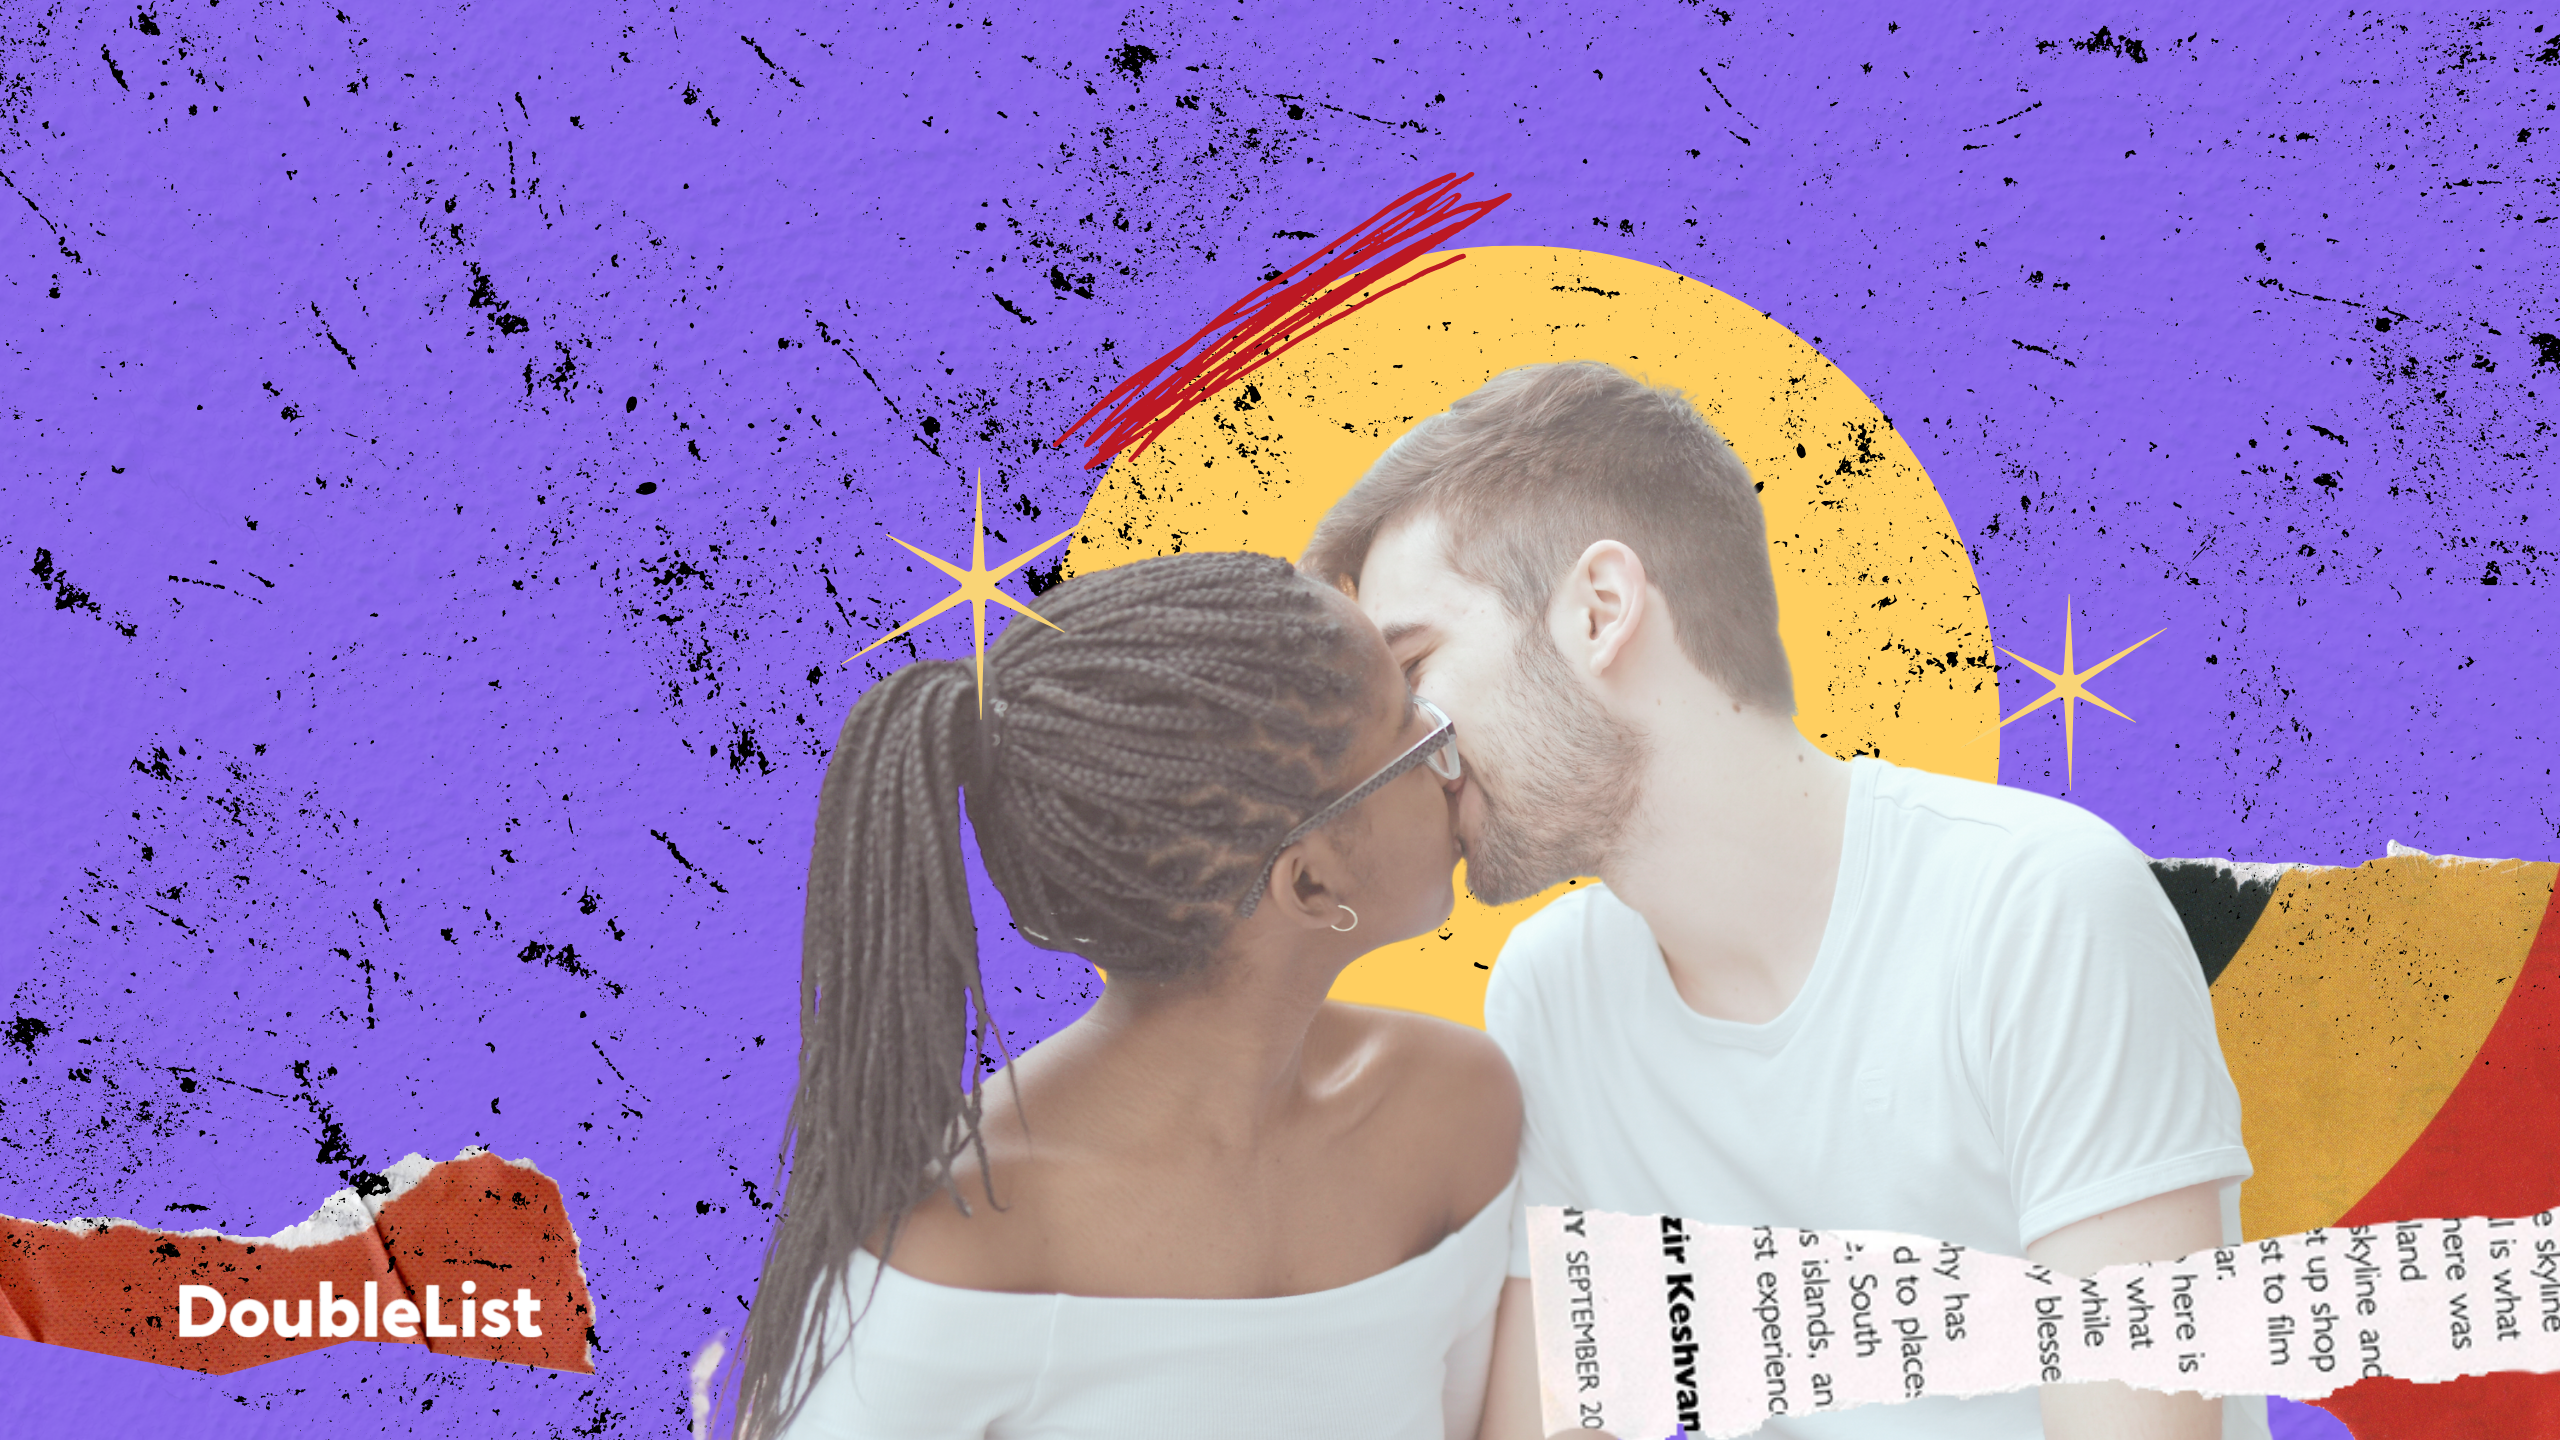 DoubleList graphic collage featuring a woman and man kissing against a colorful, splattered backdrop.